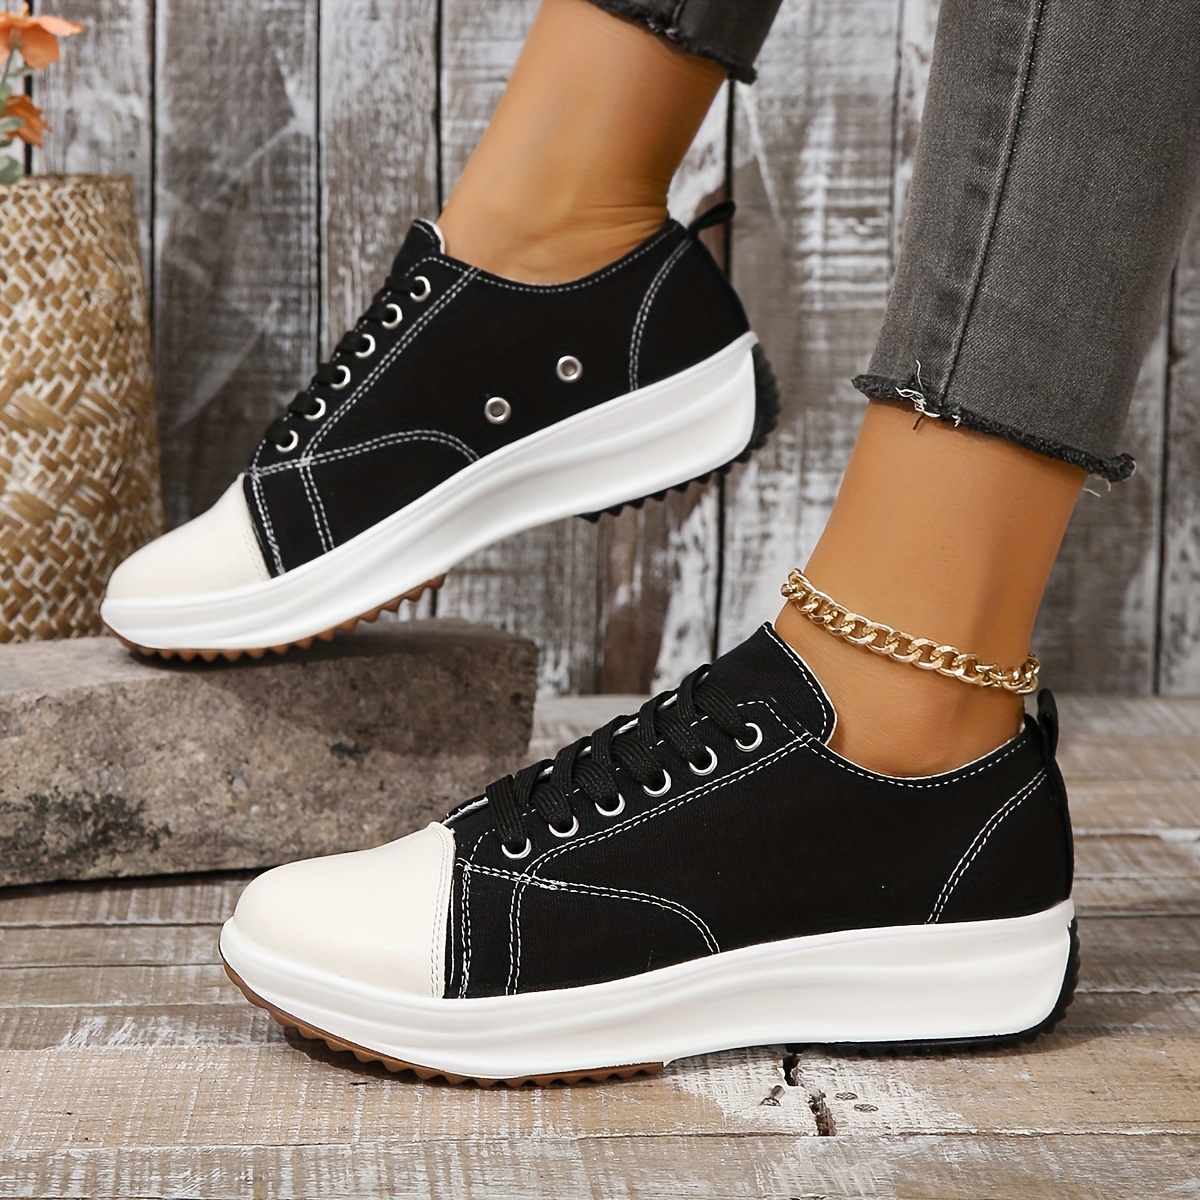 Buy Black Casual Slip On Thick Platform Ladies Shoes, Look Stylish